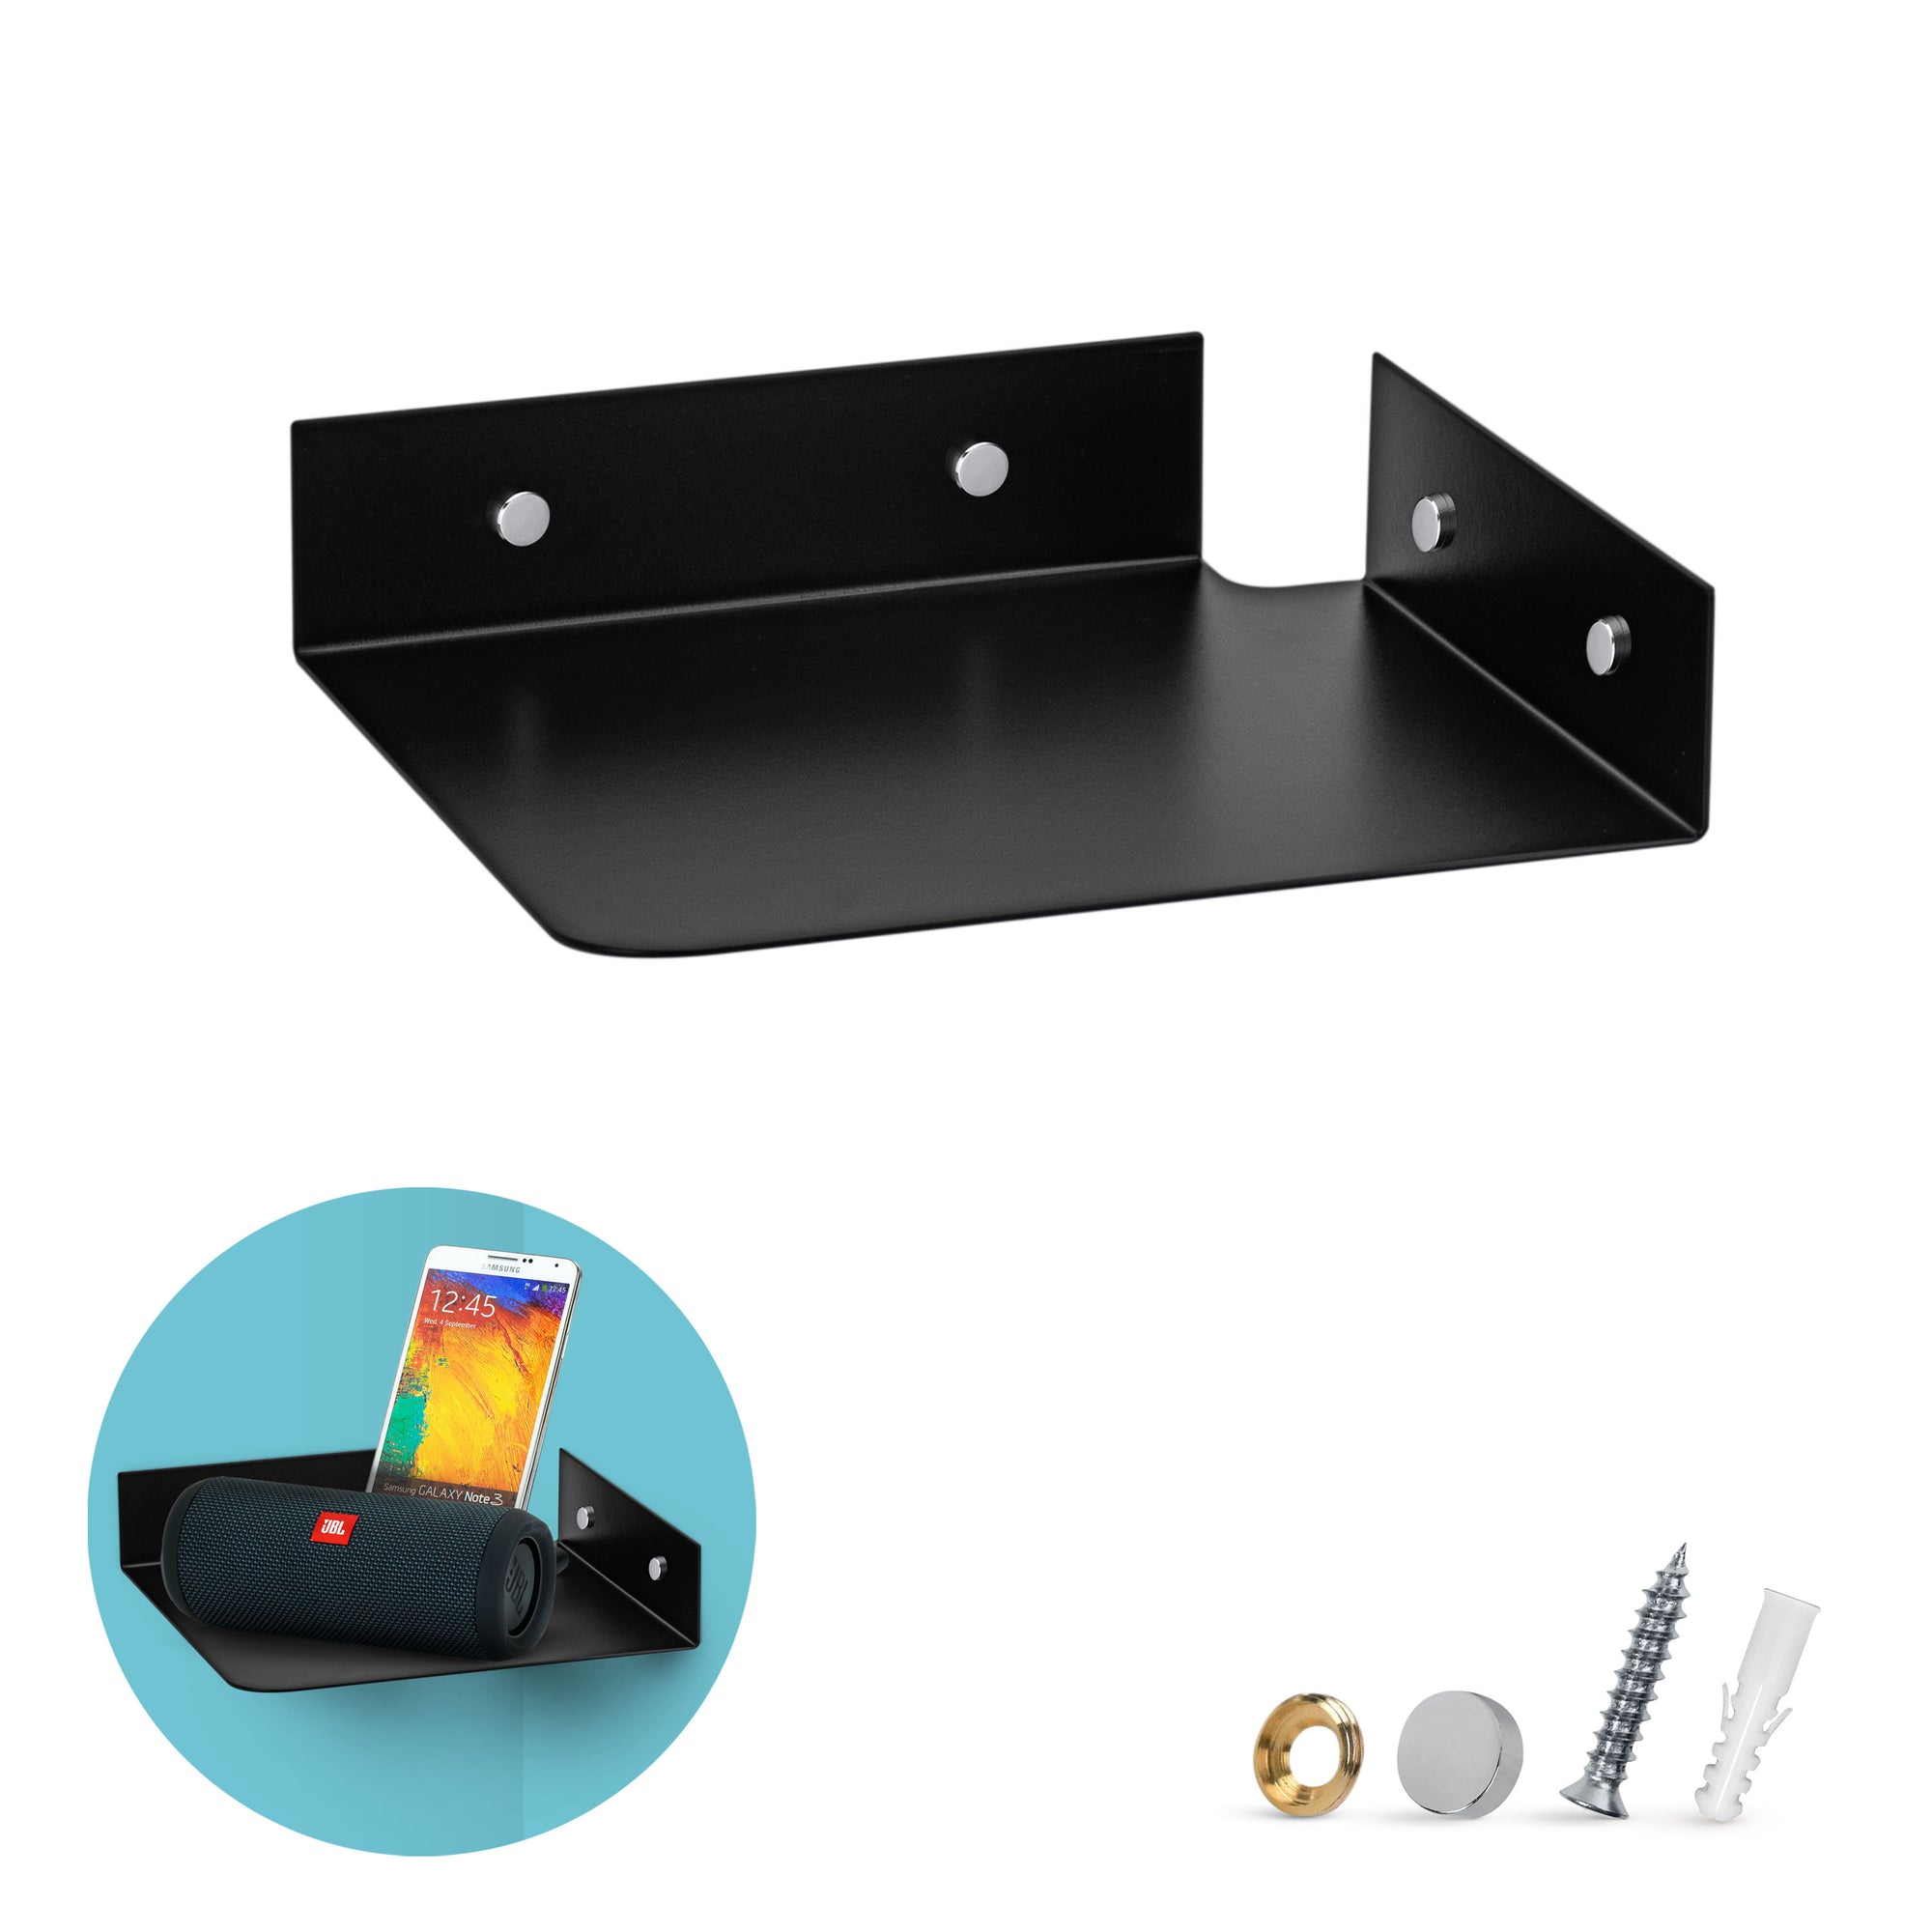 8" Metal Corner Wall Mount Shelf for Baby Monitors, Security Cameras, Sonos Speaker, Also For Wif Routers, Decor, Plants, Router, Photos, Kitchen, Bathroom, Cable Box & More